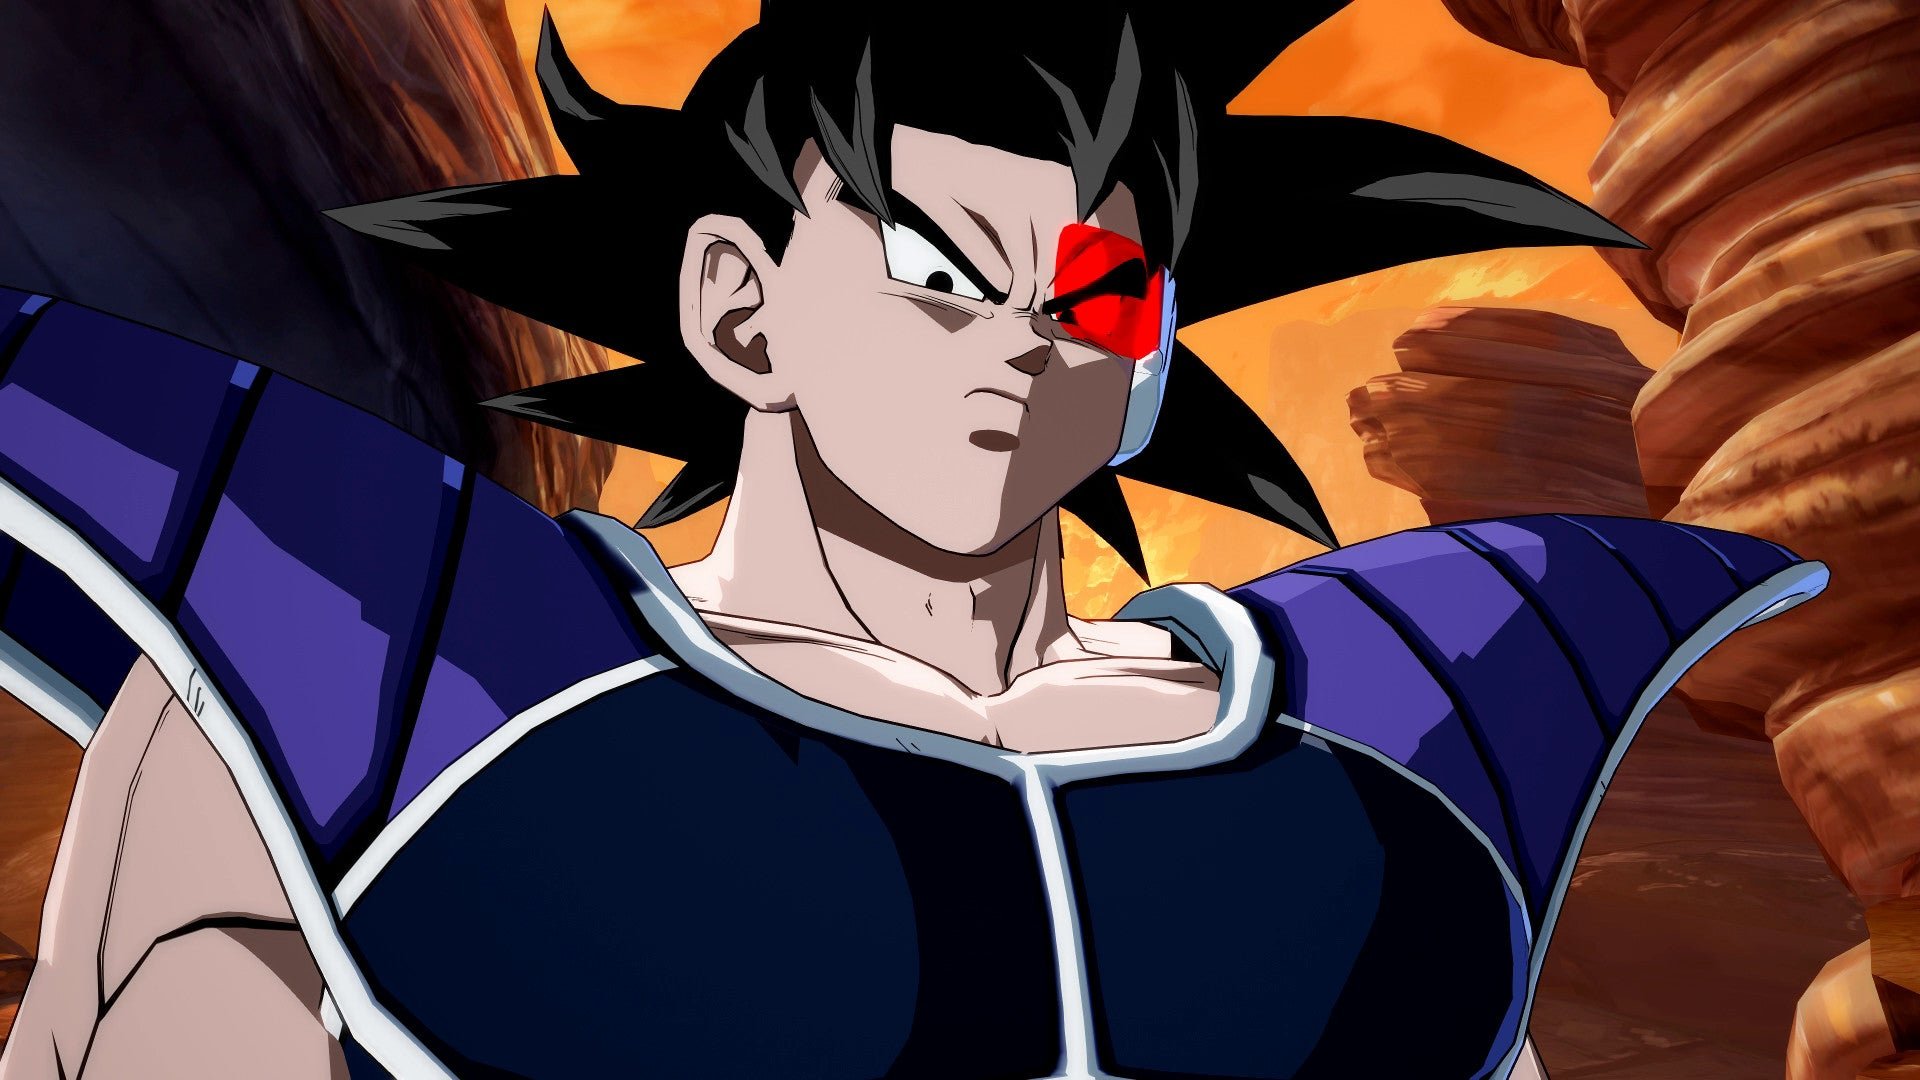 I saw a Turles Mod and now I need him in this game